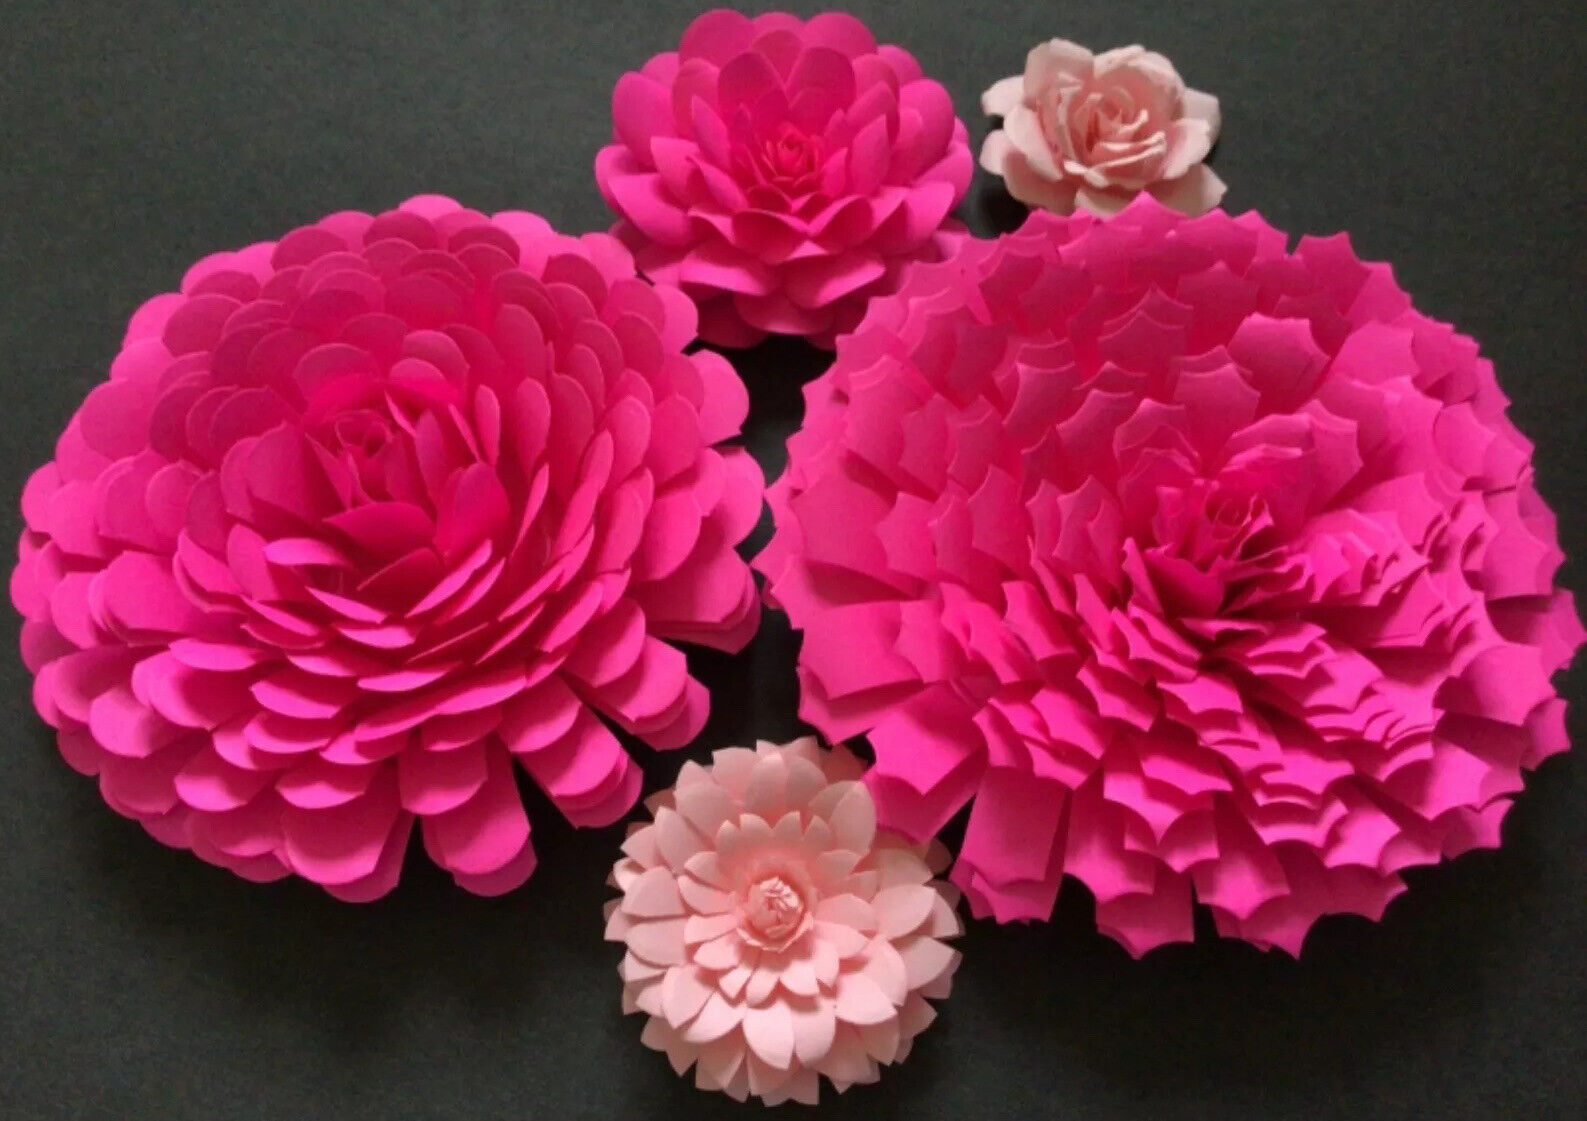 Paper Flowers 3-D Handcrafted 5 pcs Pink DIY Wedding Party Decor Craft Backdrop Unbranded Small Backdrop - фотография #2